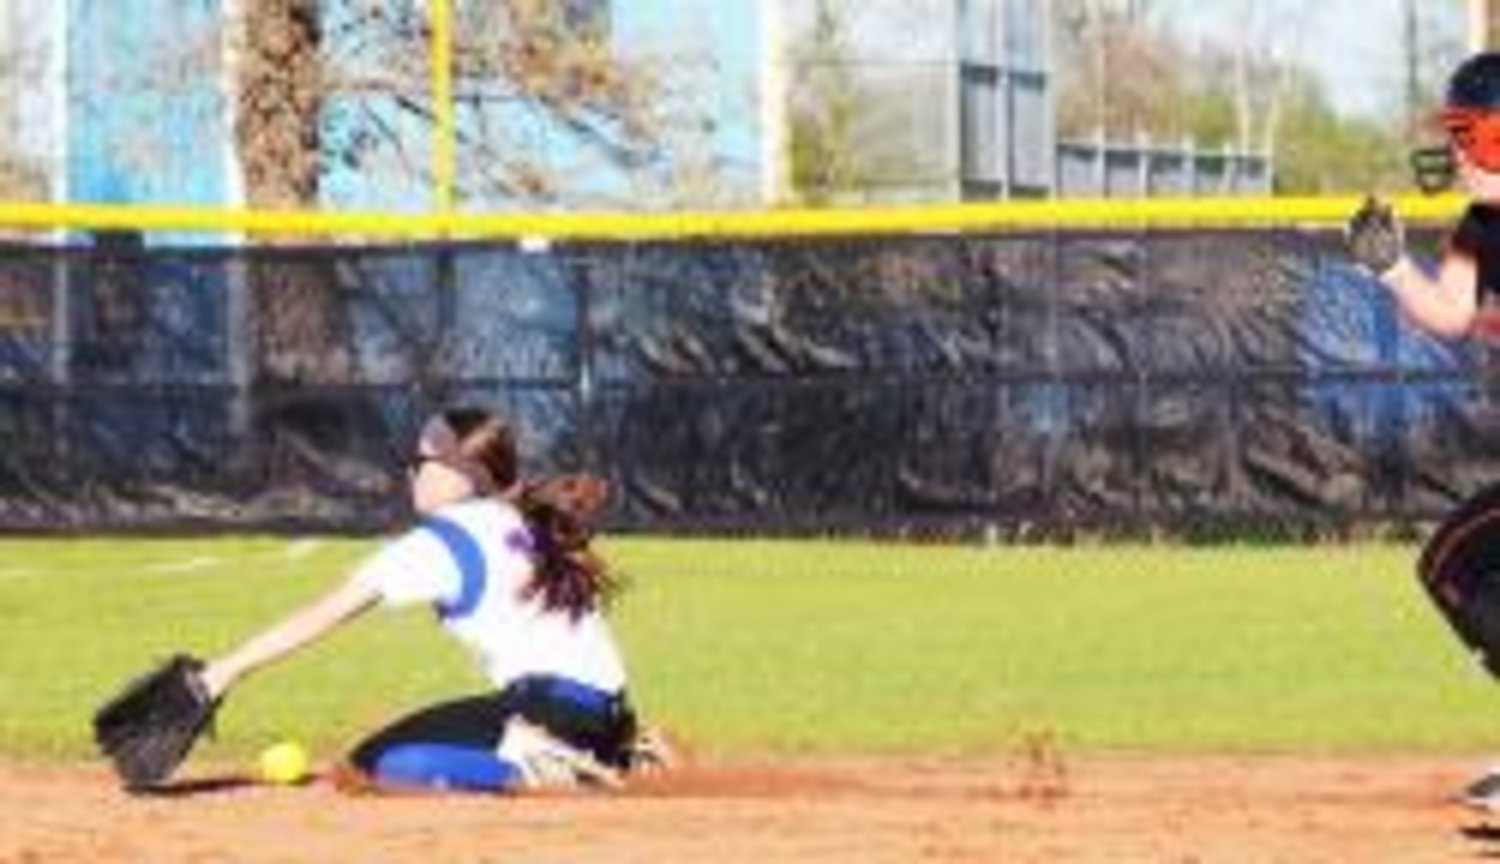 Quitman shortstop Alyssa Harris drops to her knees in a futile attempt to catch a hard hit ball to left field in the third inning Tuesday against Grand Saline.